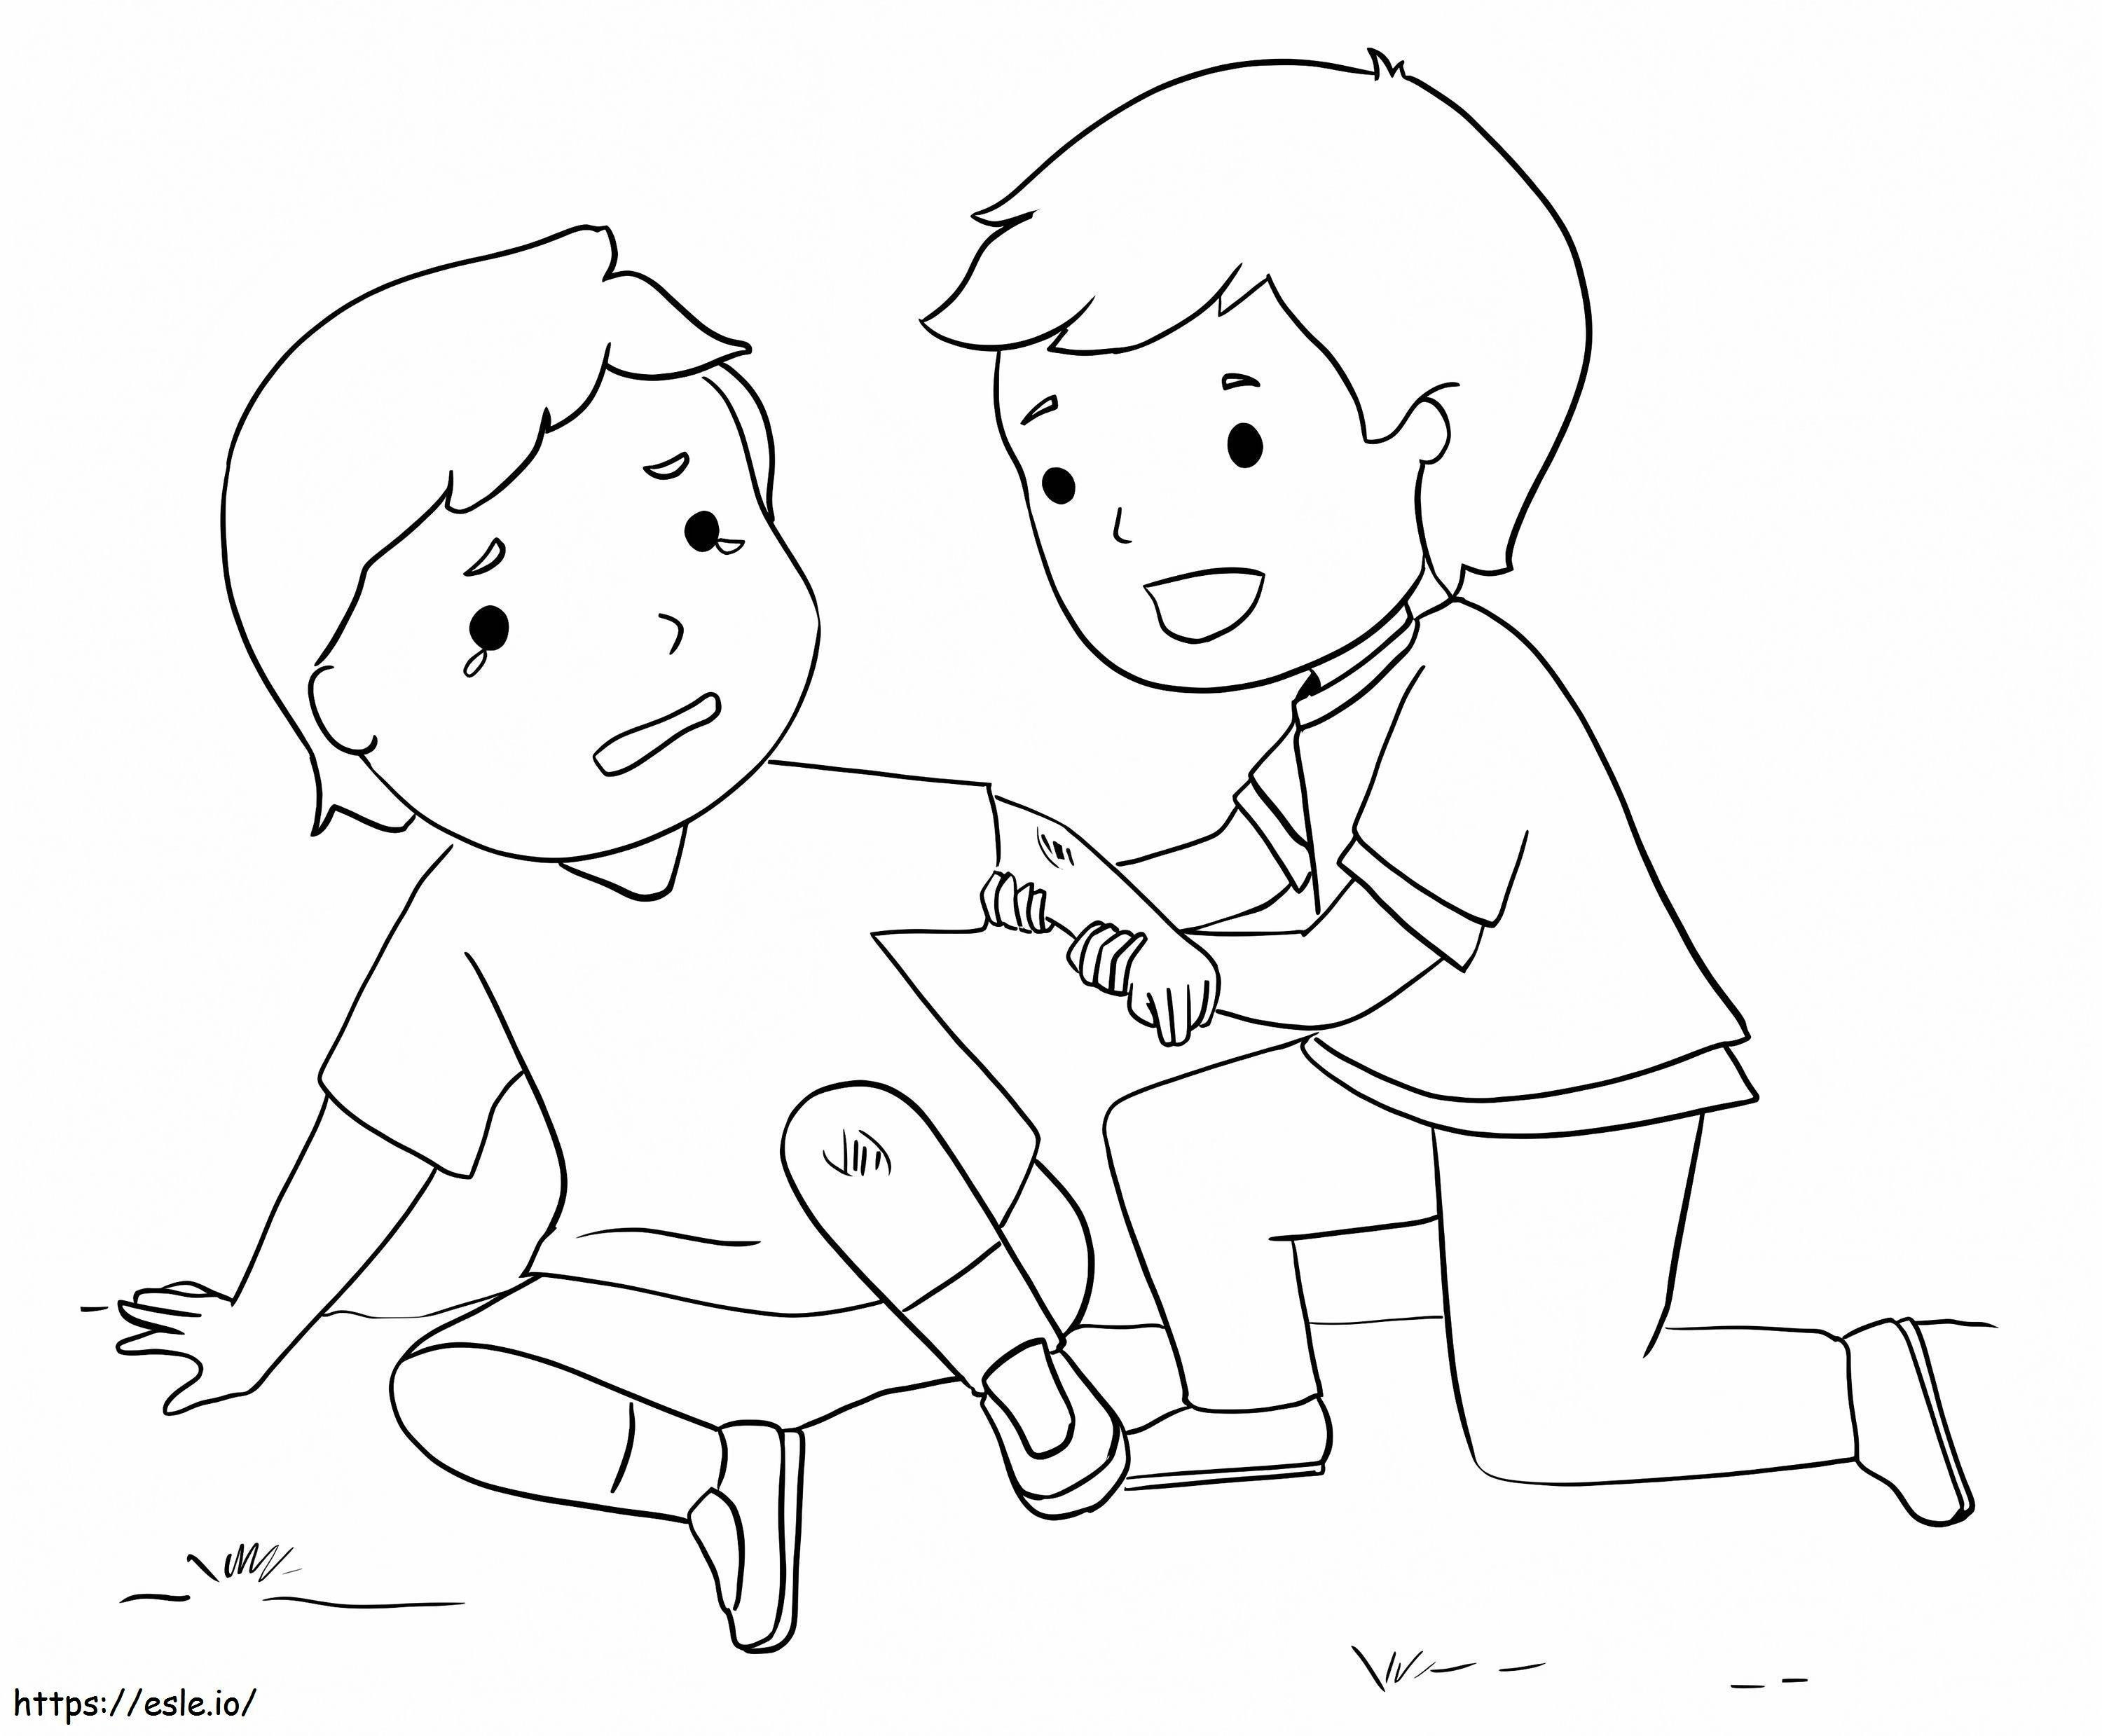 Caring Friends coloring page